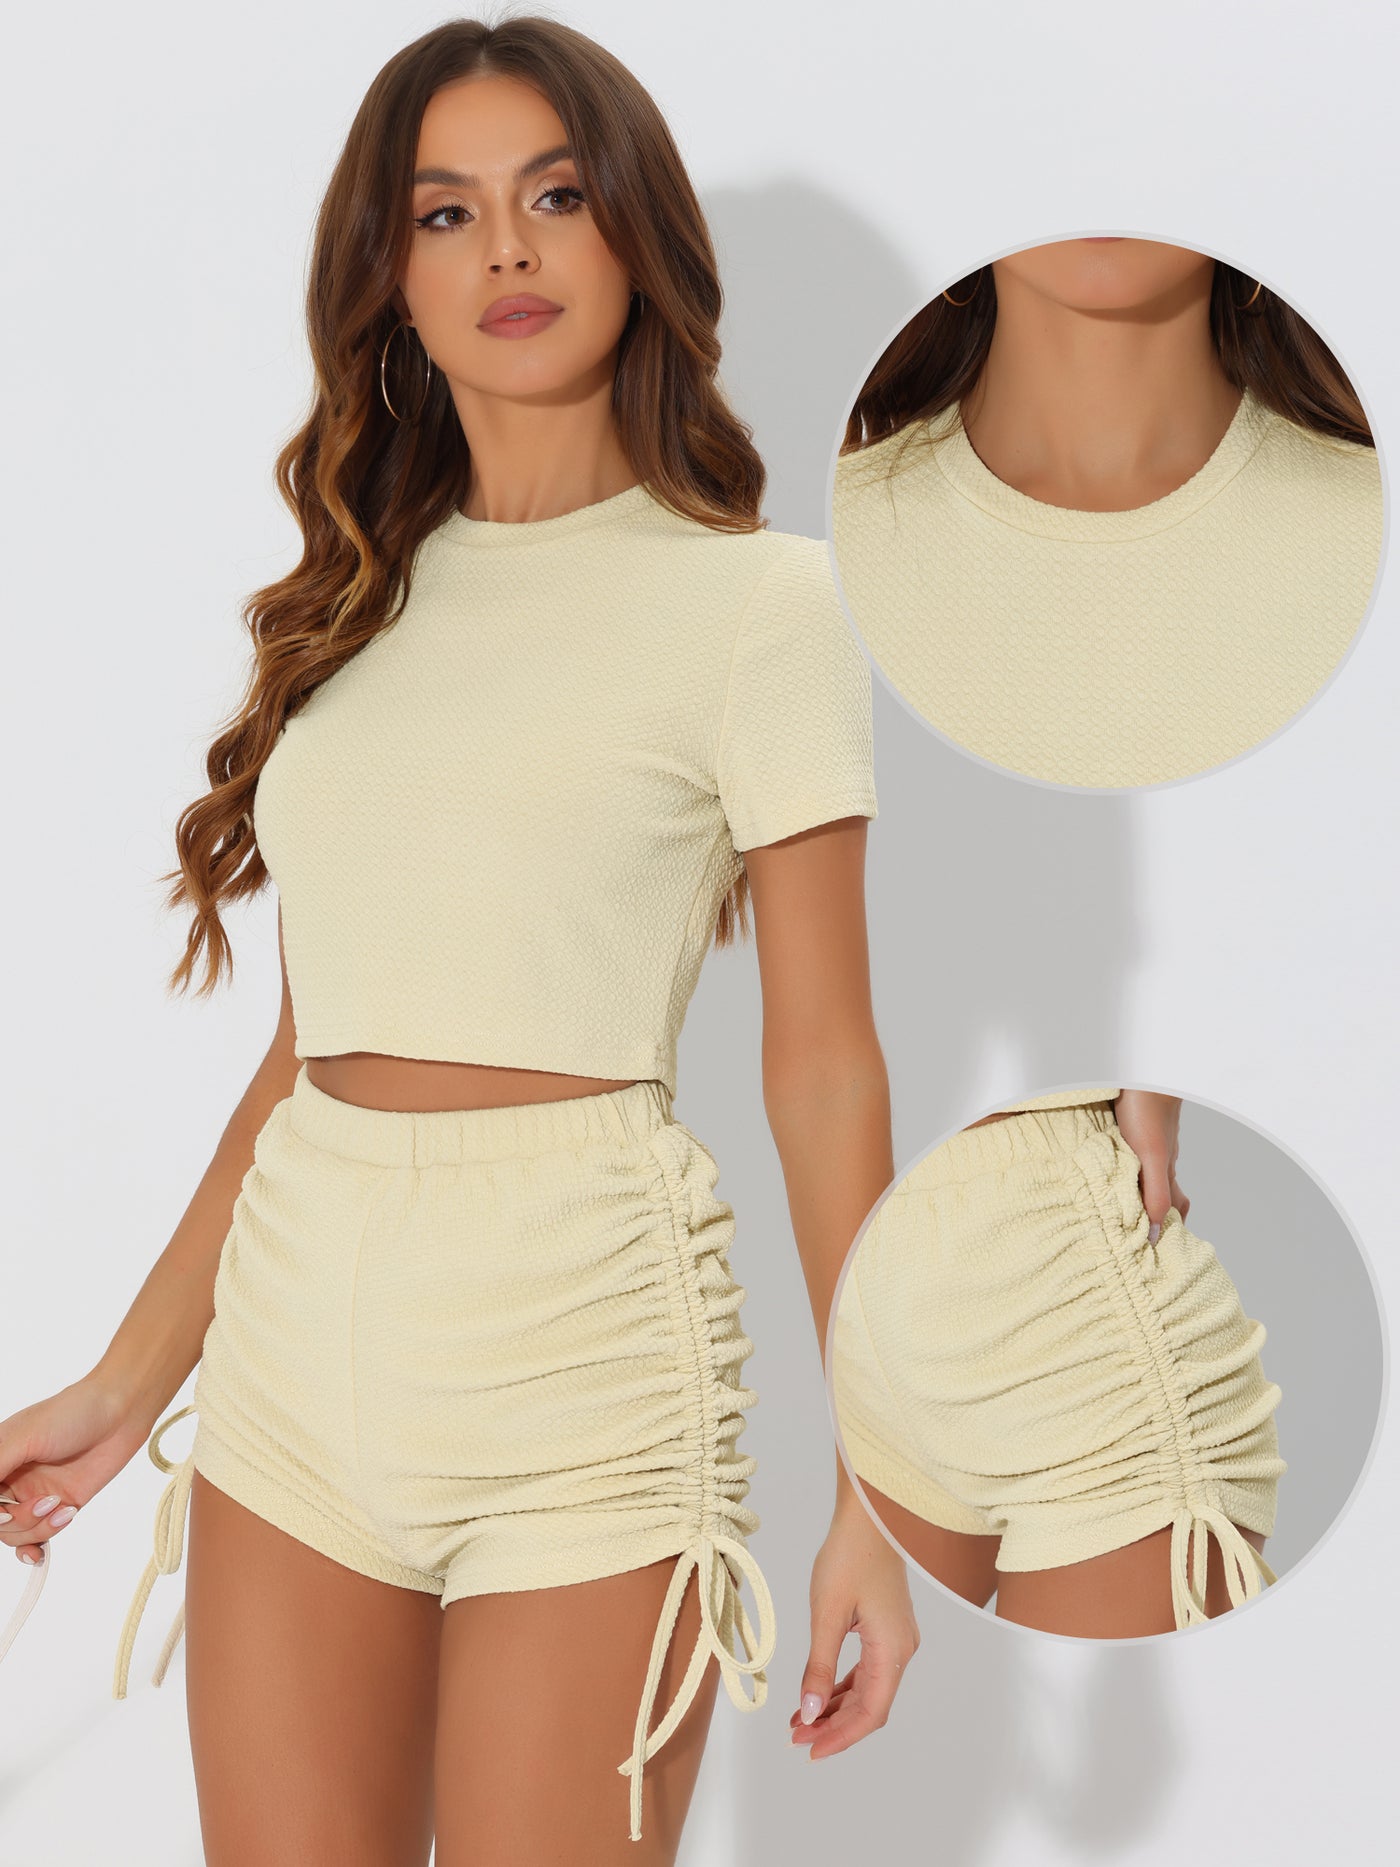 Allegra K Summer Tracksuits 2 Piece Outfits for Women's Textured Short Sleeve Top with High Waisted Drawstring Shorts Sets